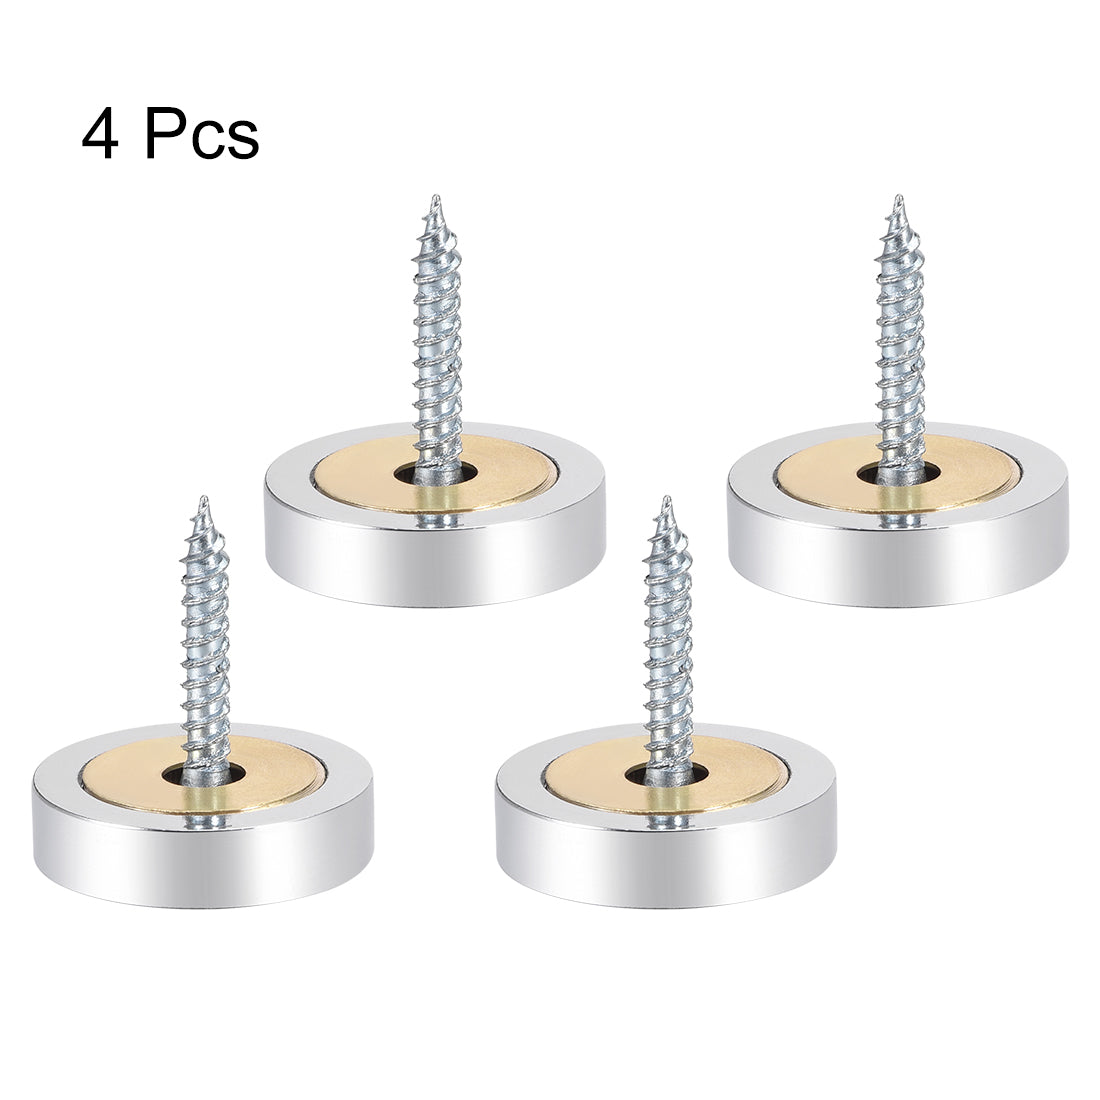 uxcell Uxcell Mirror Screws Decorative Caps Cover Stainless Steel 4pcs